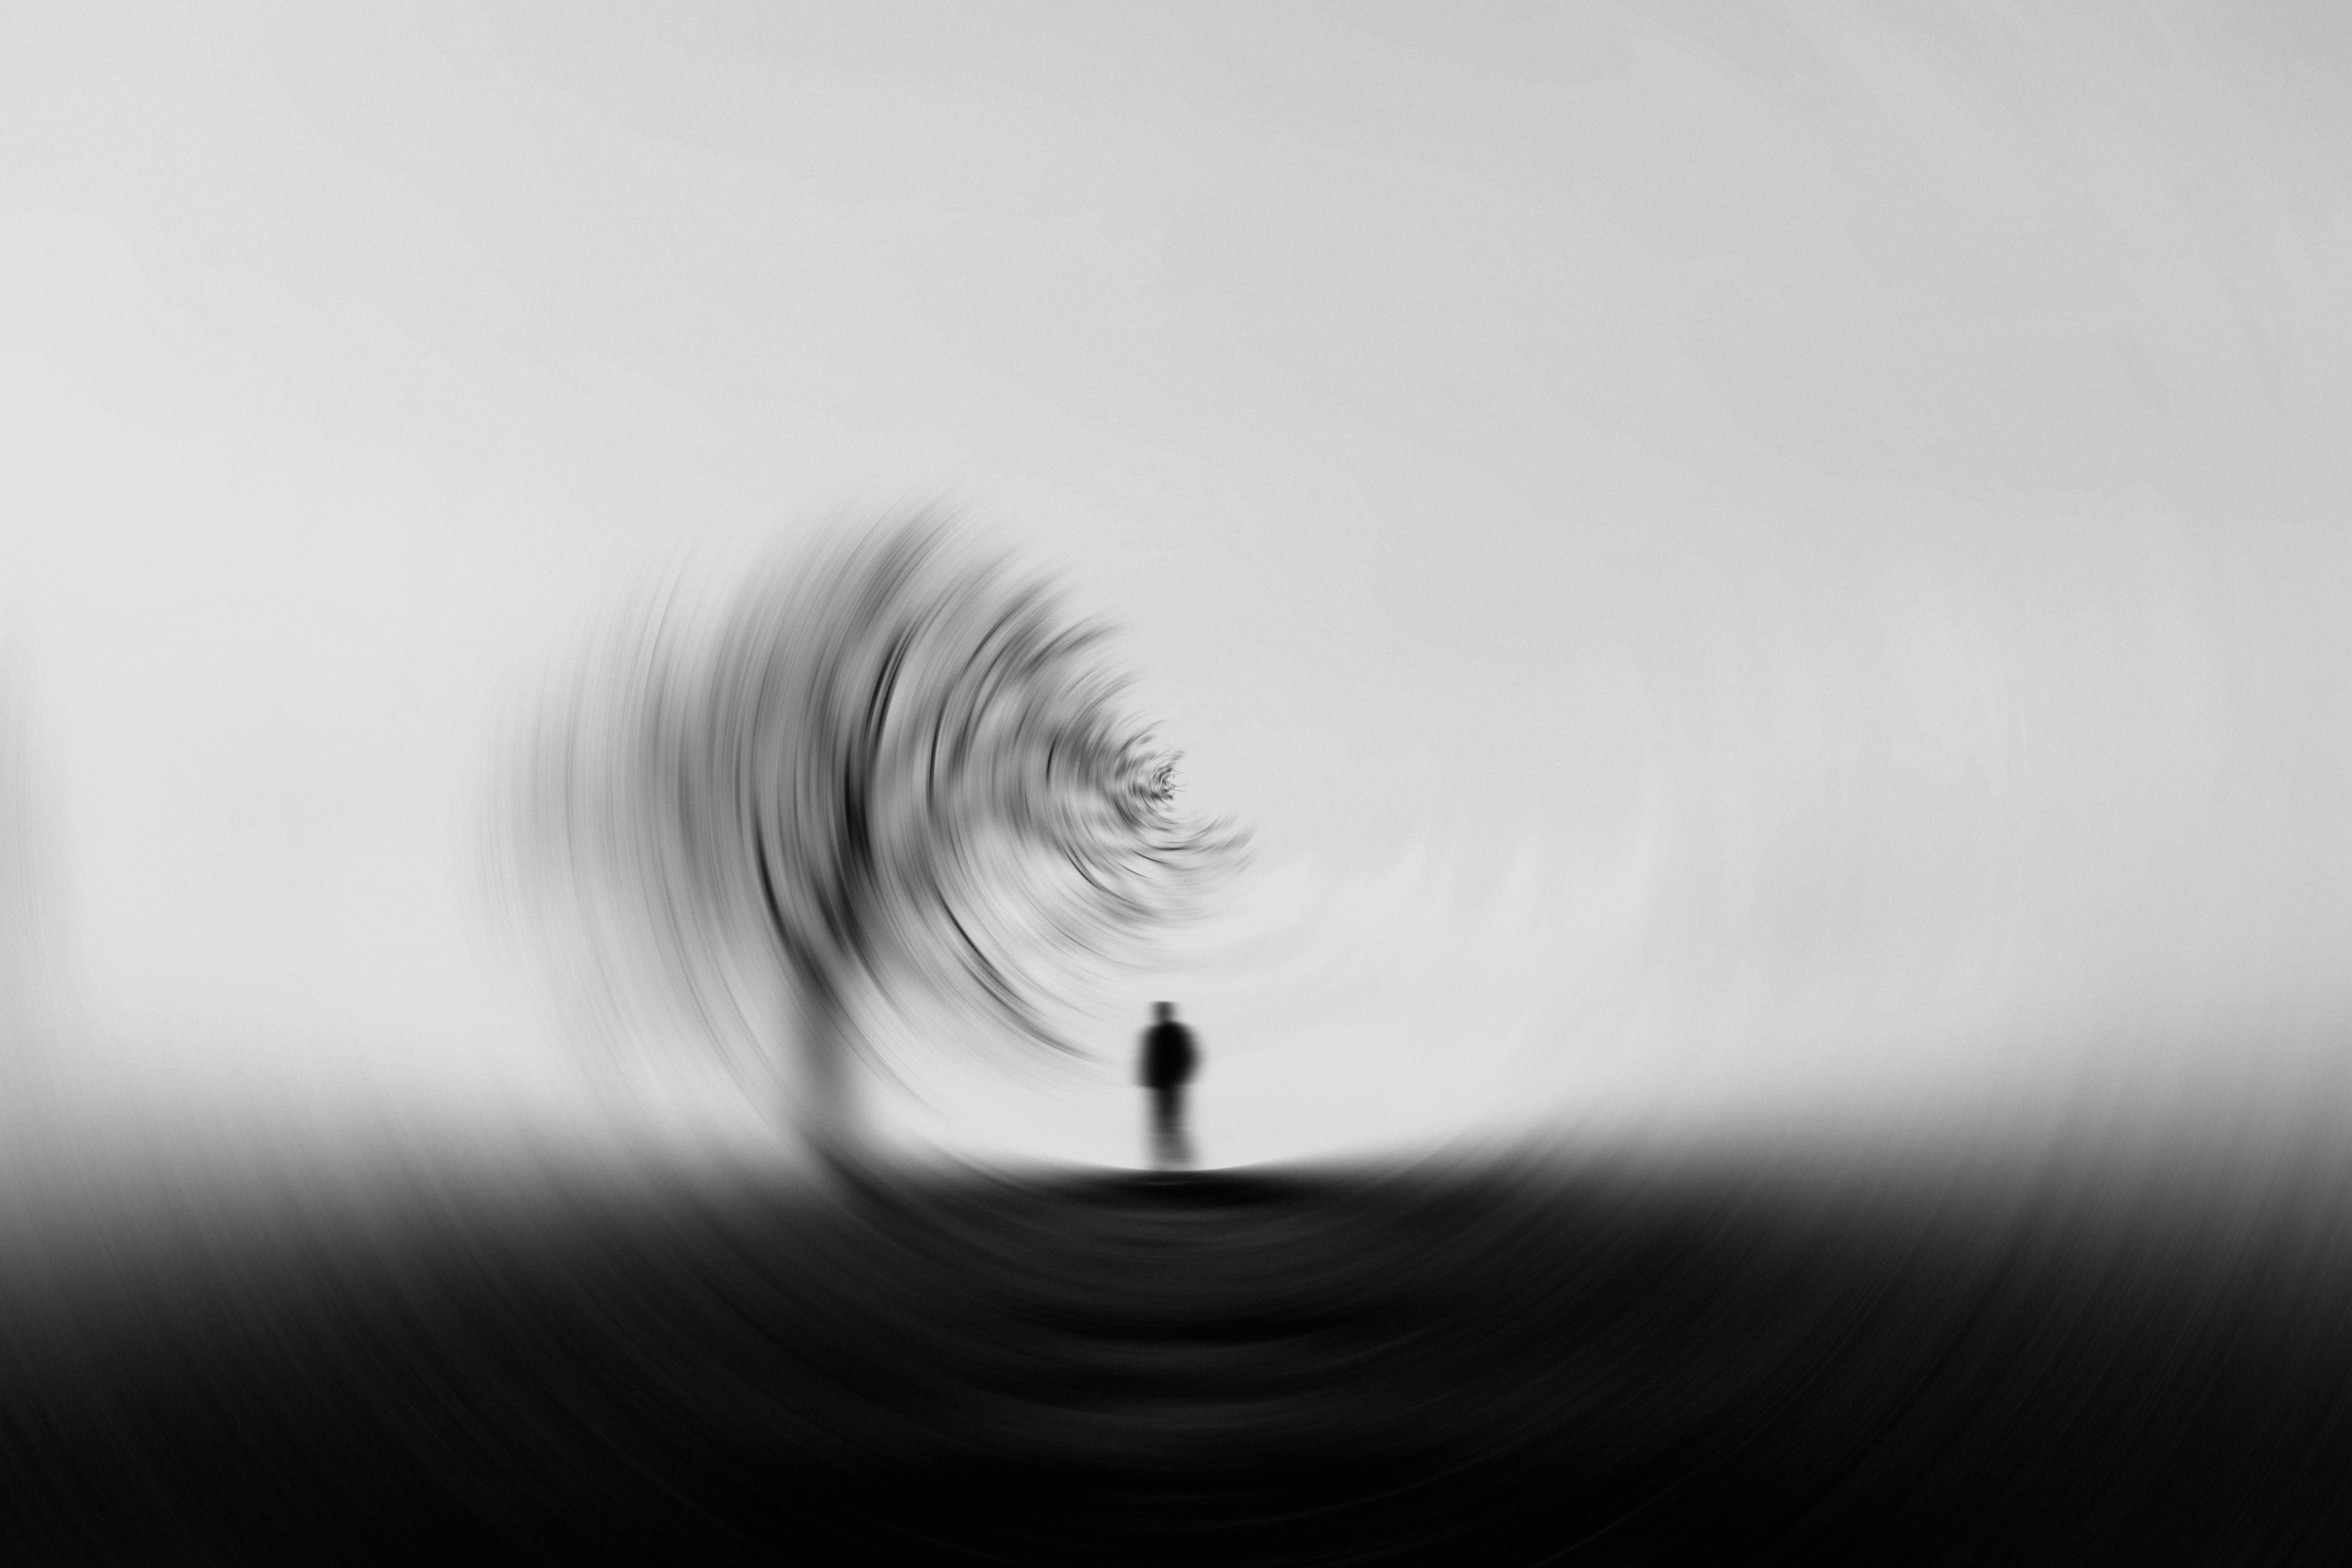 silhouette, bw, chb, smooth, blur, miscellanea, miscellaneous, wood, tree, effect Full HD